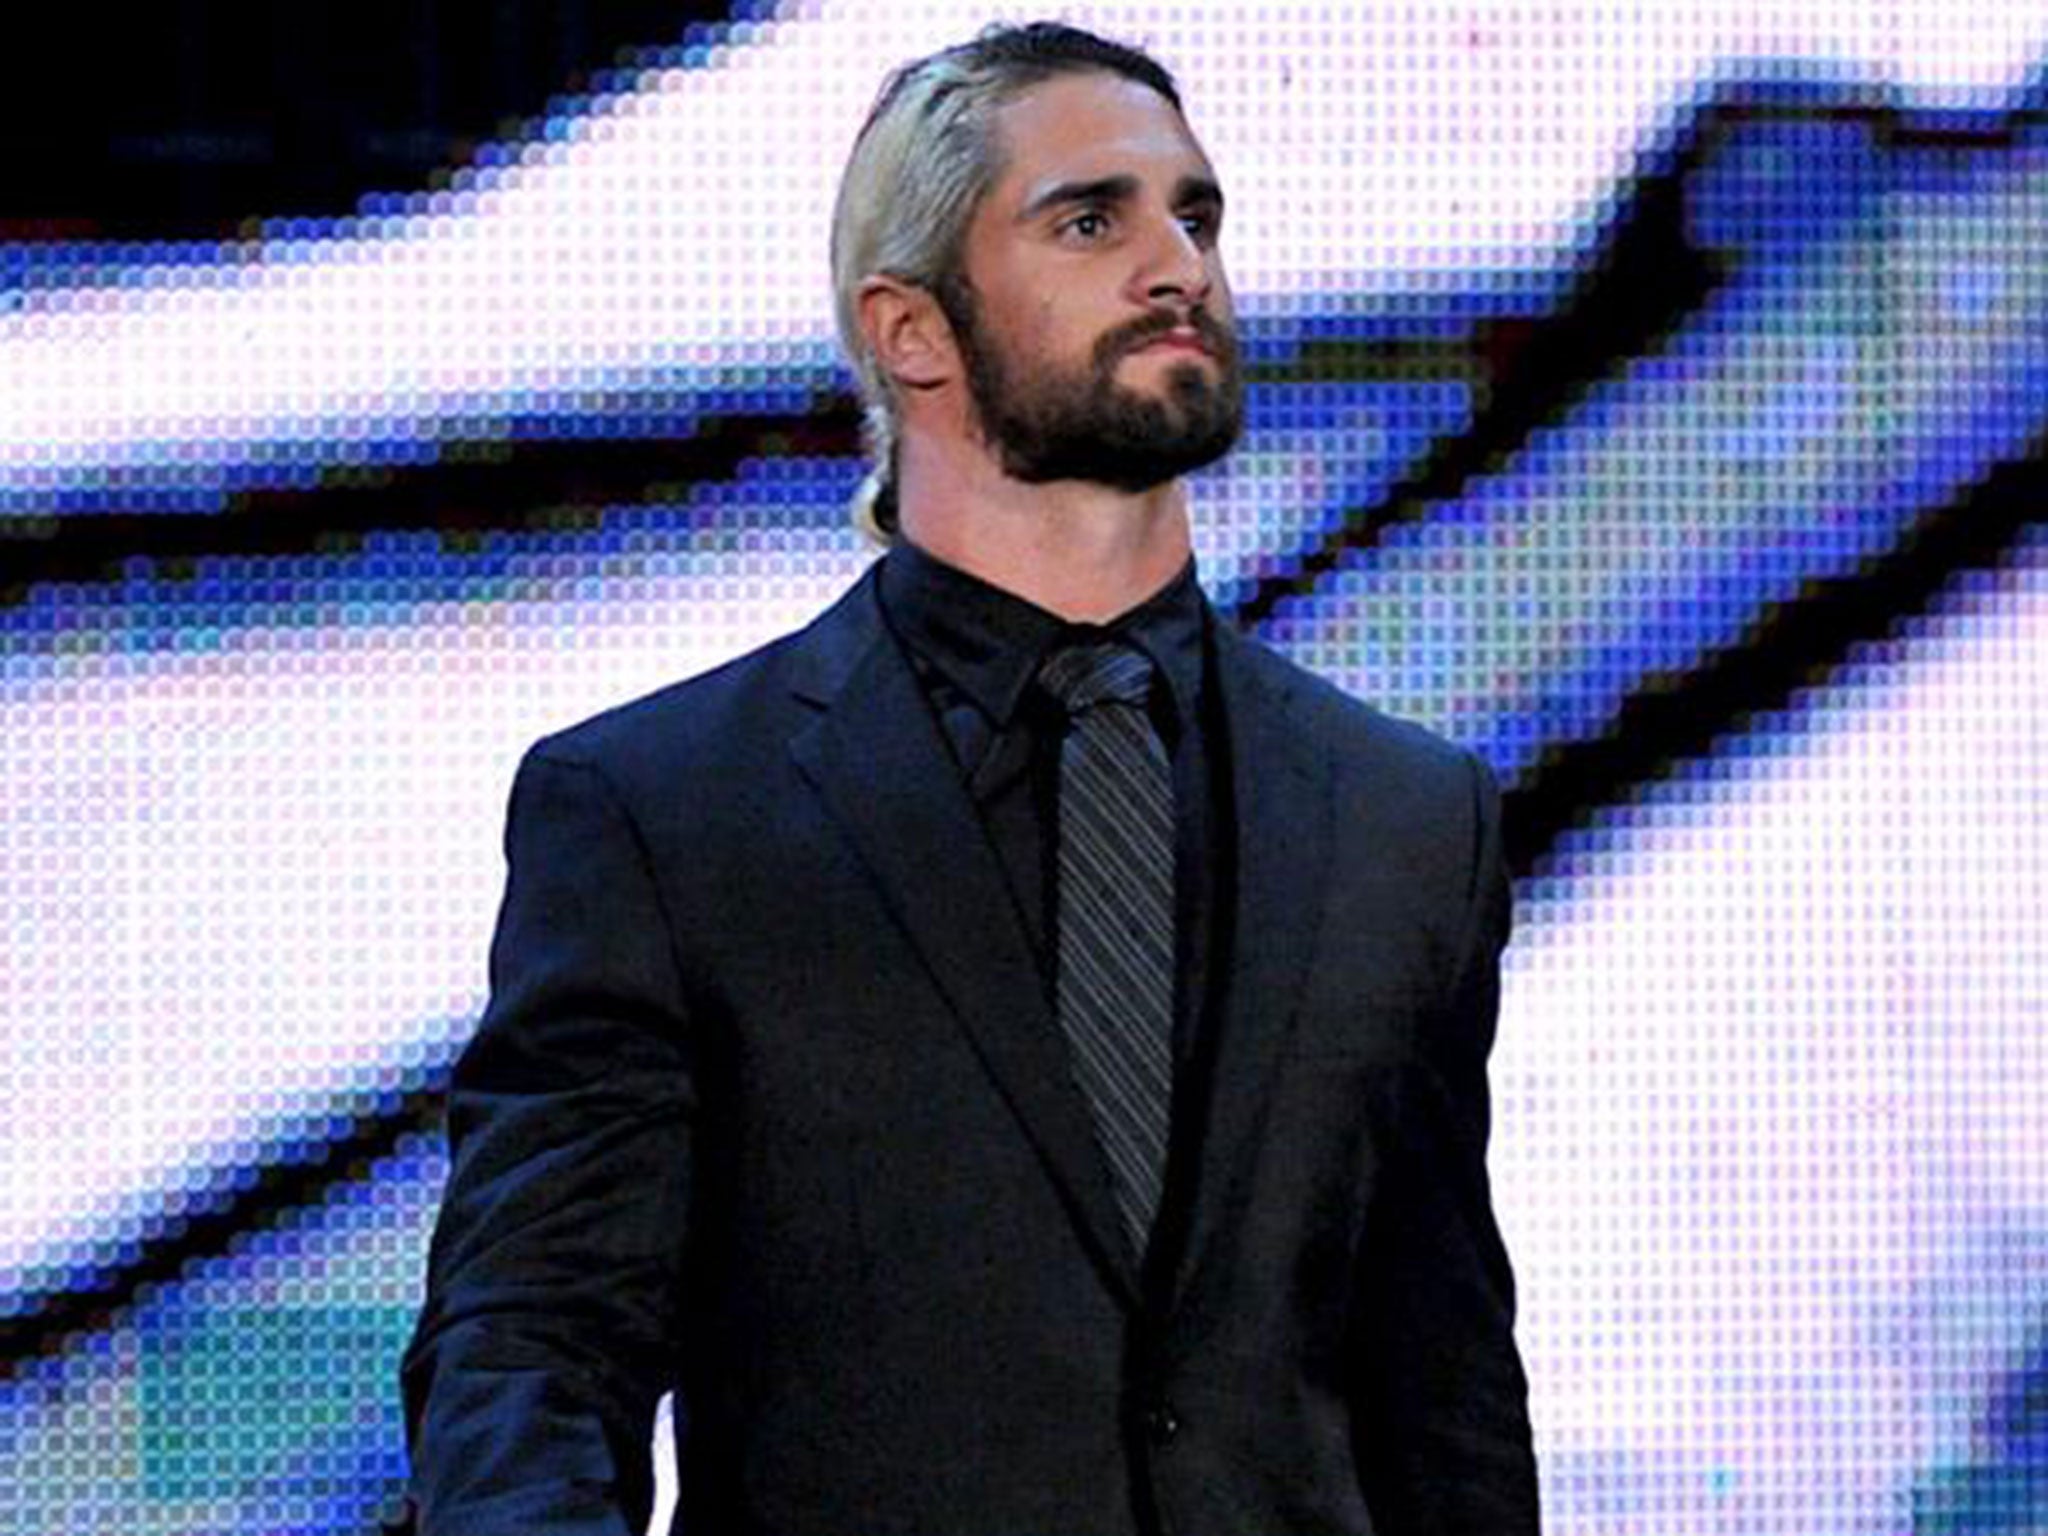 Seth Rollins makes his way to the ring